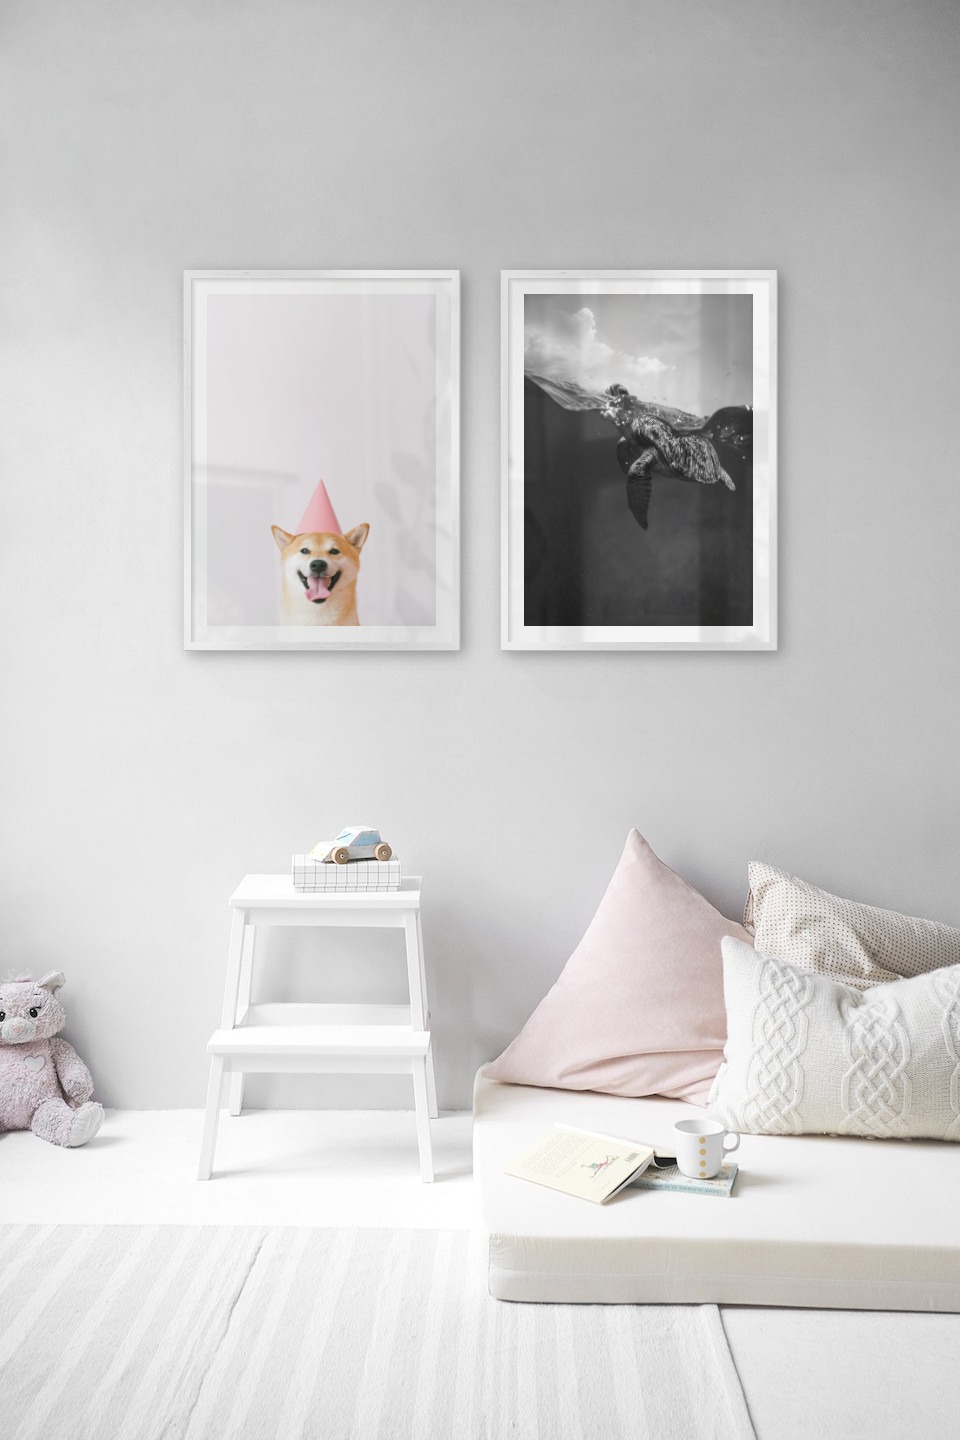 Gallery wall with picture frames in silver in sizes 50x70 with prints "Dog with pink hat" and "Turtle"